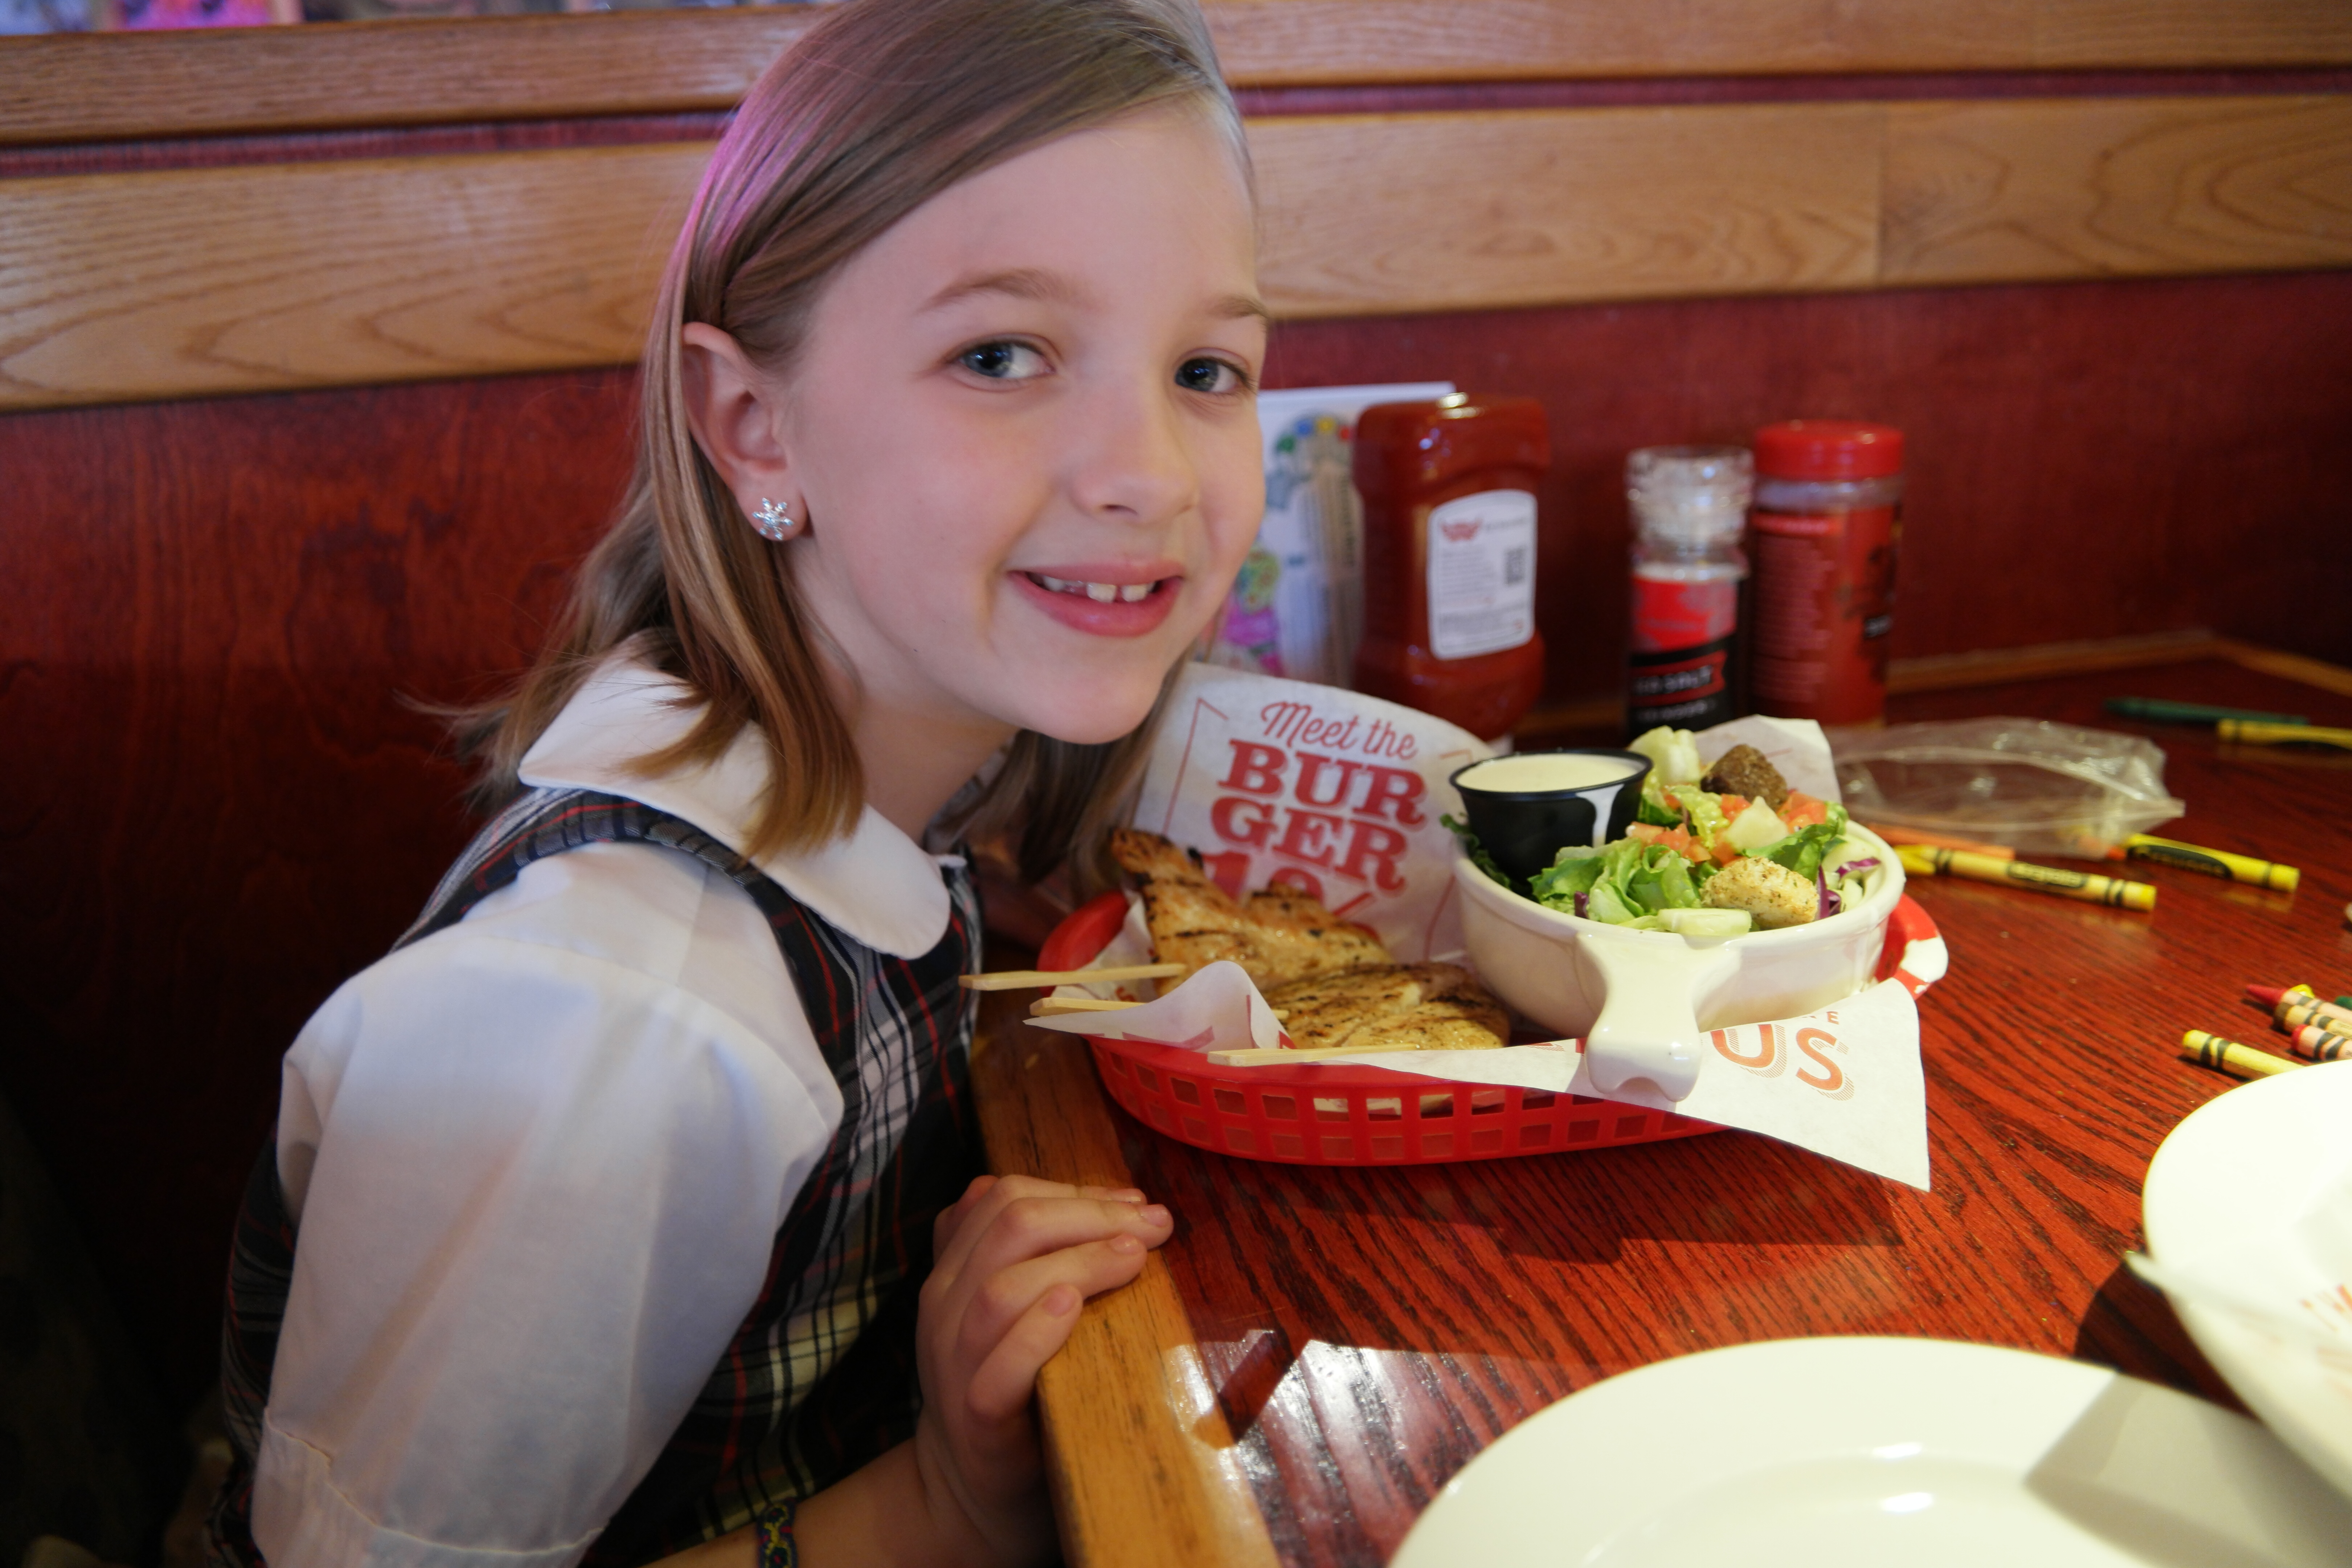 Dining Out Using the Red Robin Interactive Allergen Menu – $25 Gift Card Giveaway